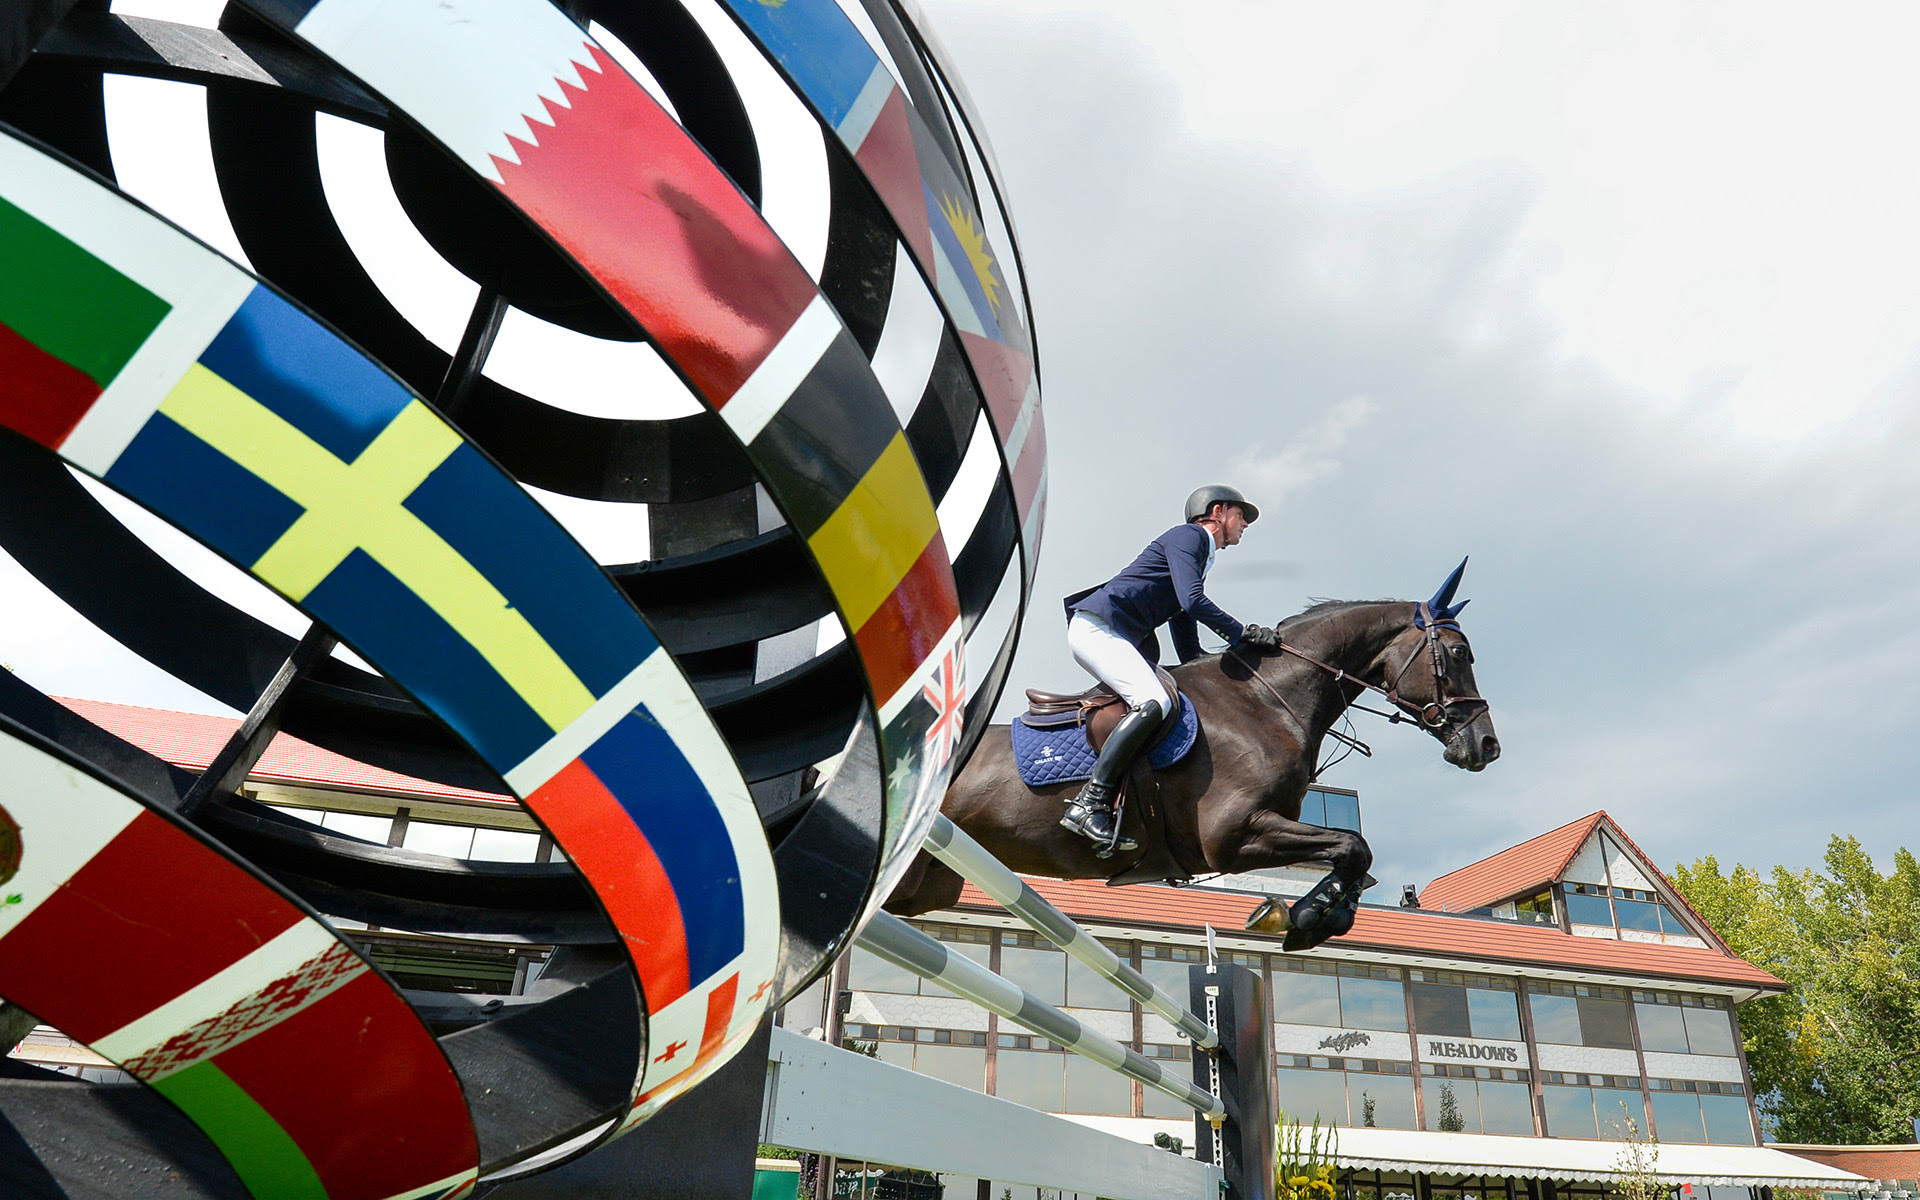 Ben Maher and Matthew Sampson score big on day one in Spruce Meadows